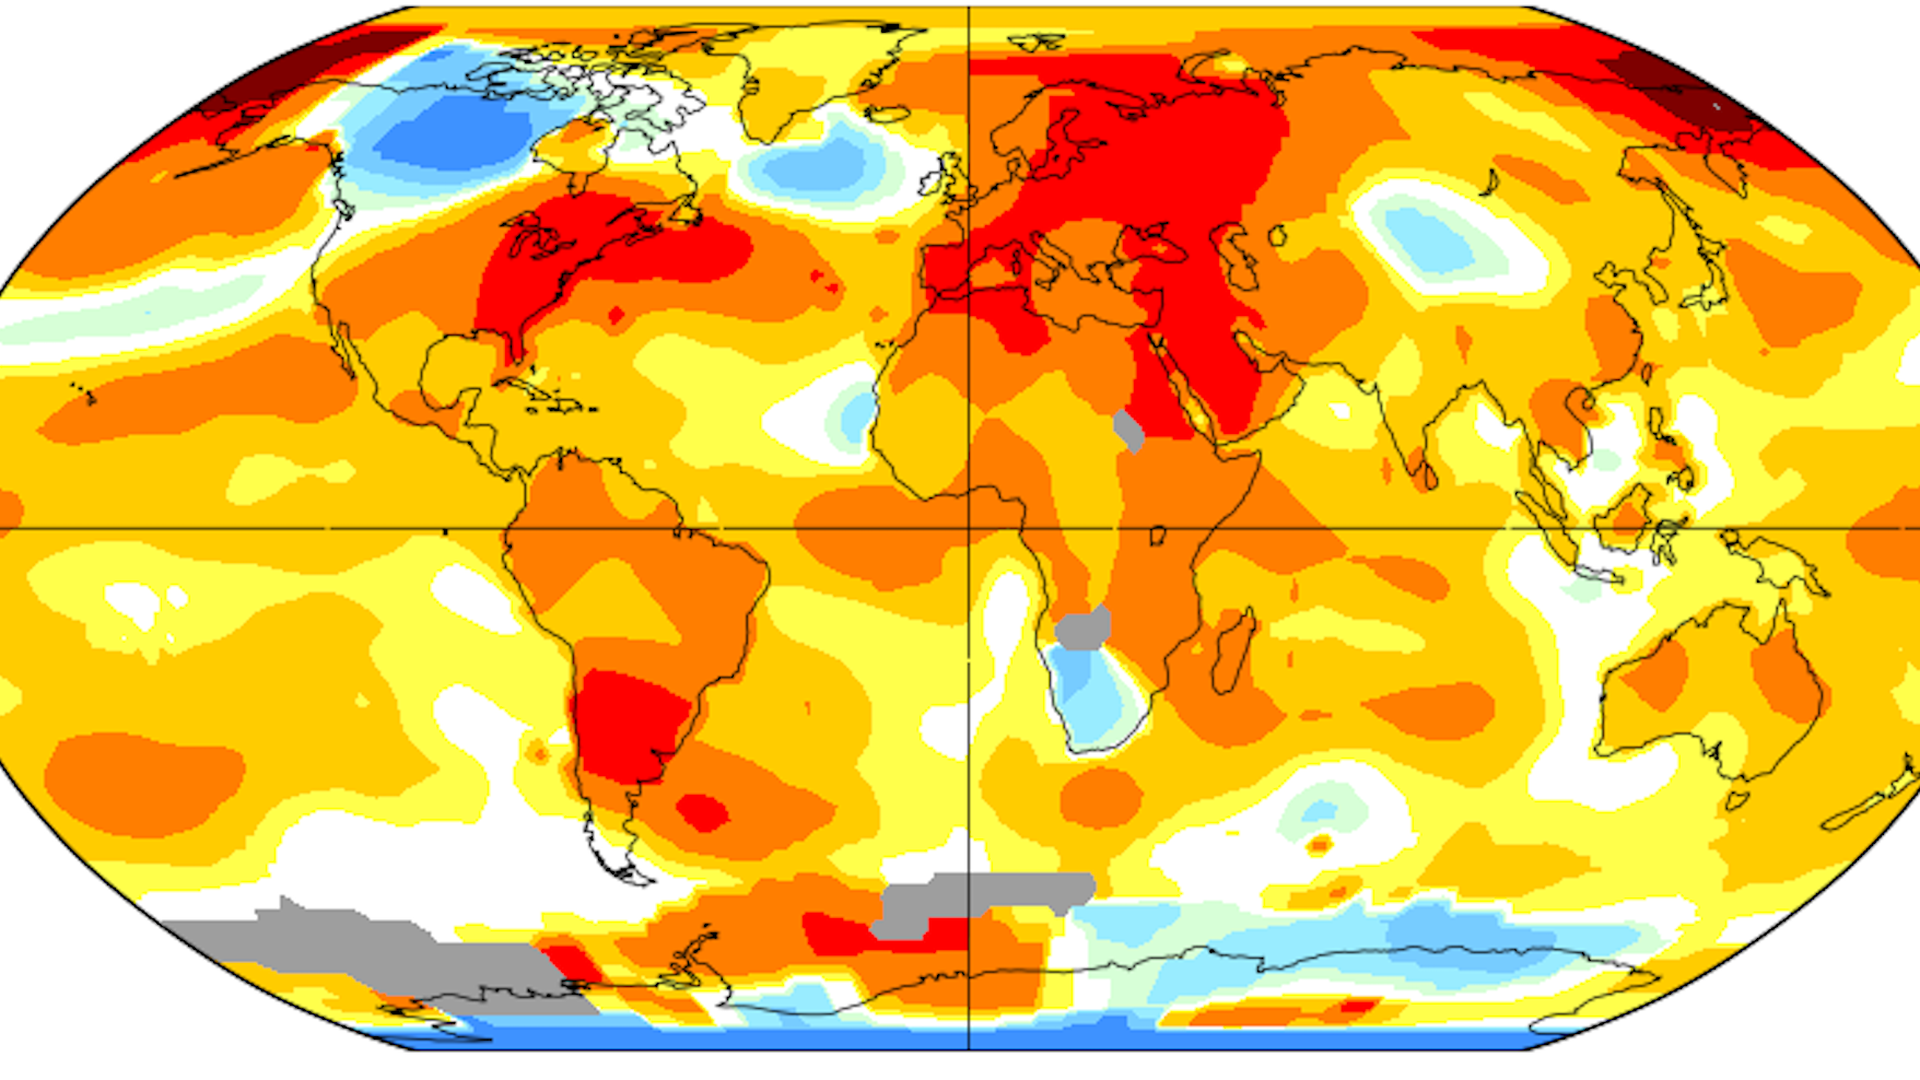 September ranked as the 5th-warmest such month on record dating back to 1895.